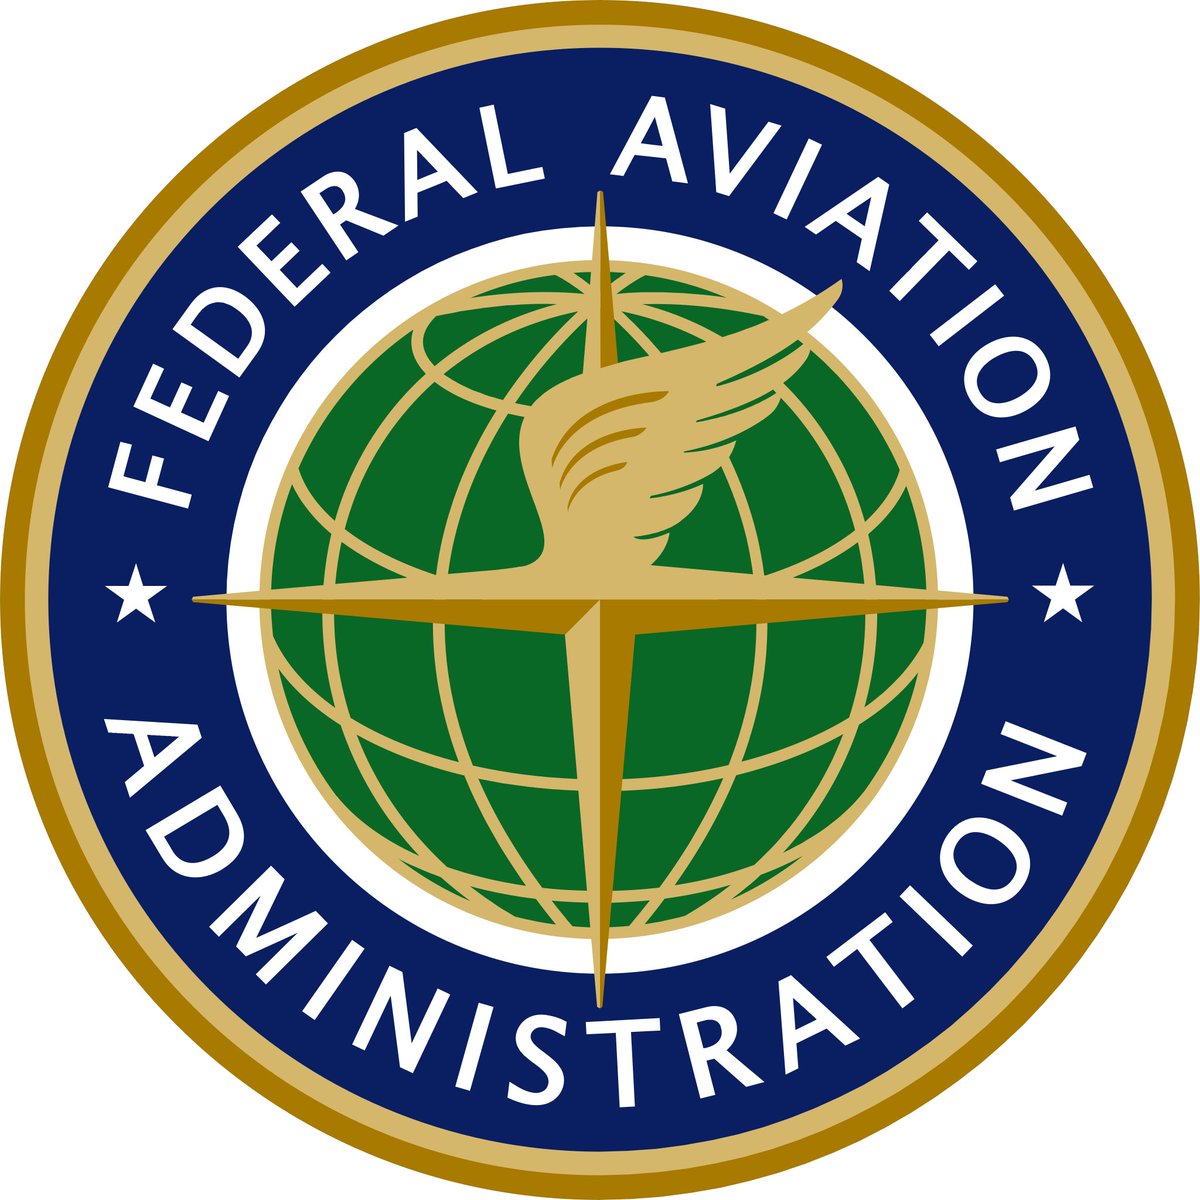 This week the FAA published the recommendation report of the Aviation Rulemaking Committee (ARC) for Mental Health & Aviation Medical Clearances. EAA was one of 20 voting members of the ARC. Read more: discover.eaa.org/fA0K50R9tCJ #aviation #mentalhealth #mentalawareness #FAA #EAA